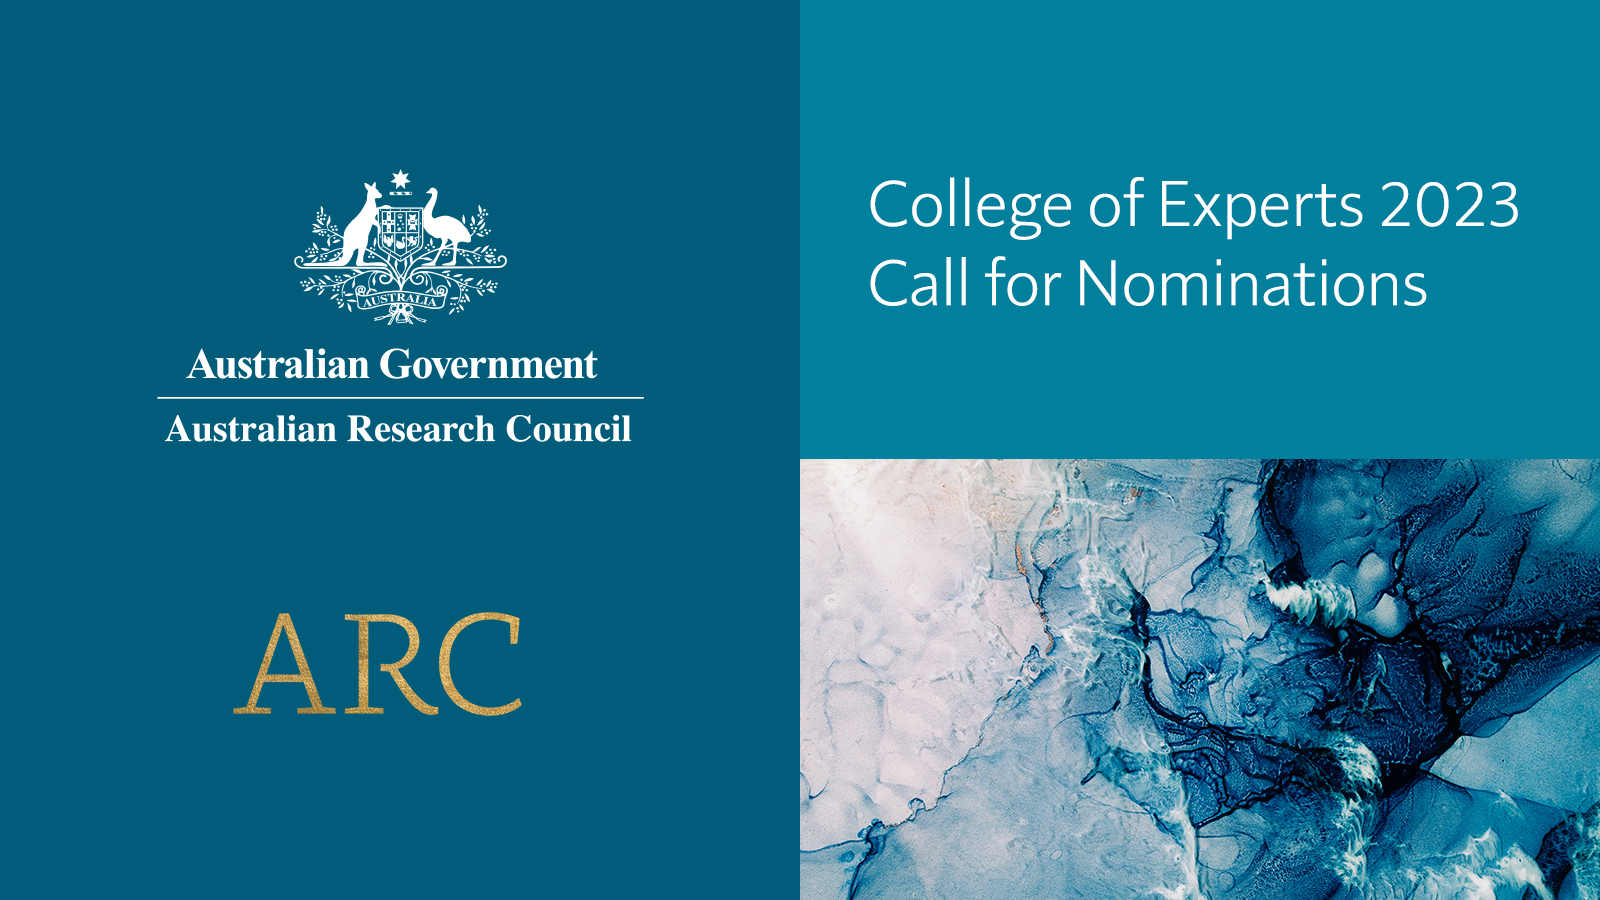 ARC on Twitter "ARC College of Experts Nominations for 2023 is now